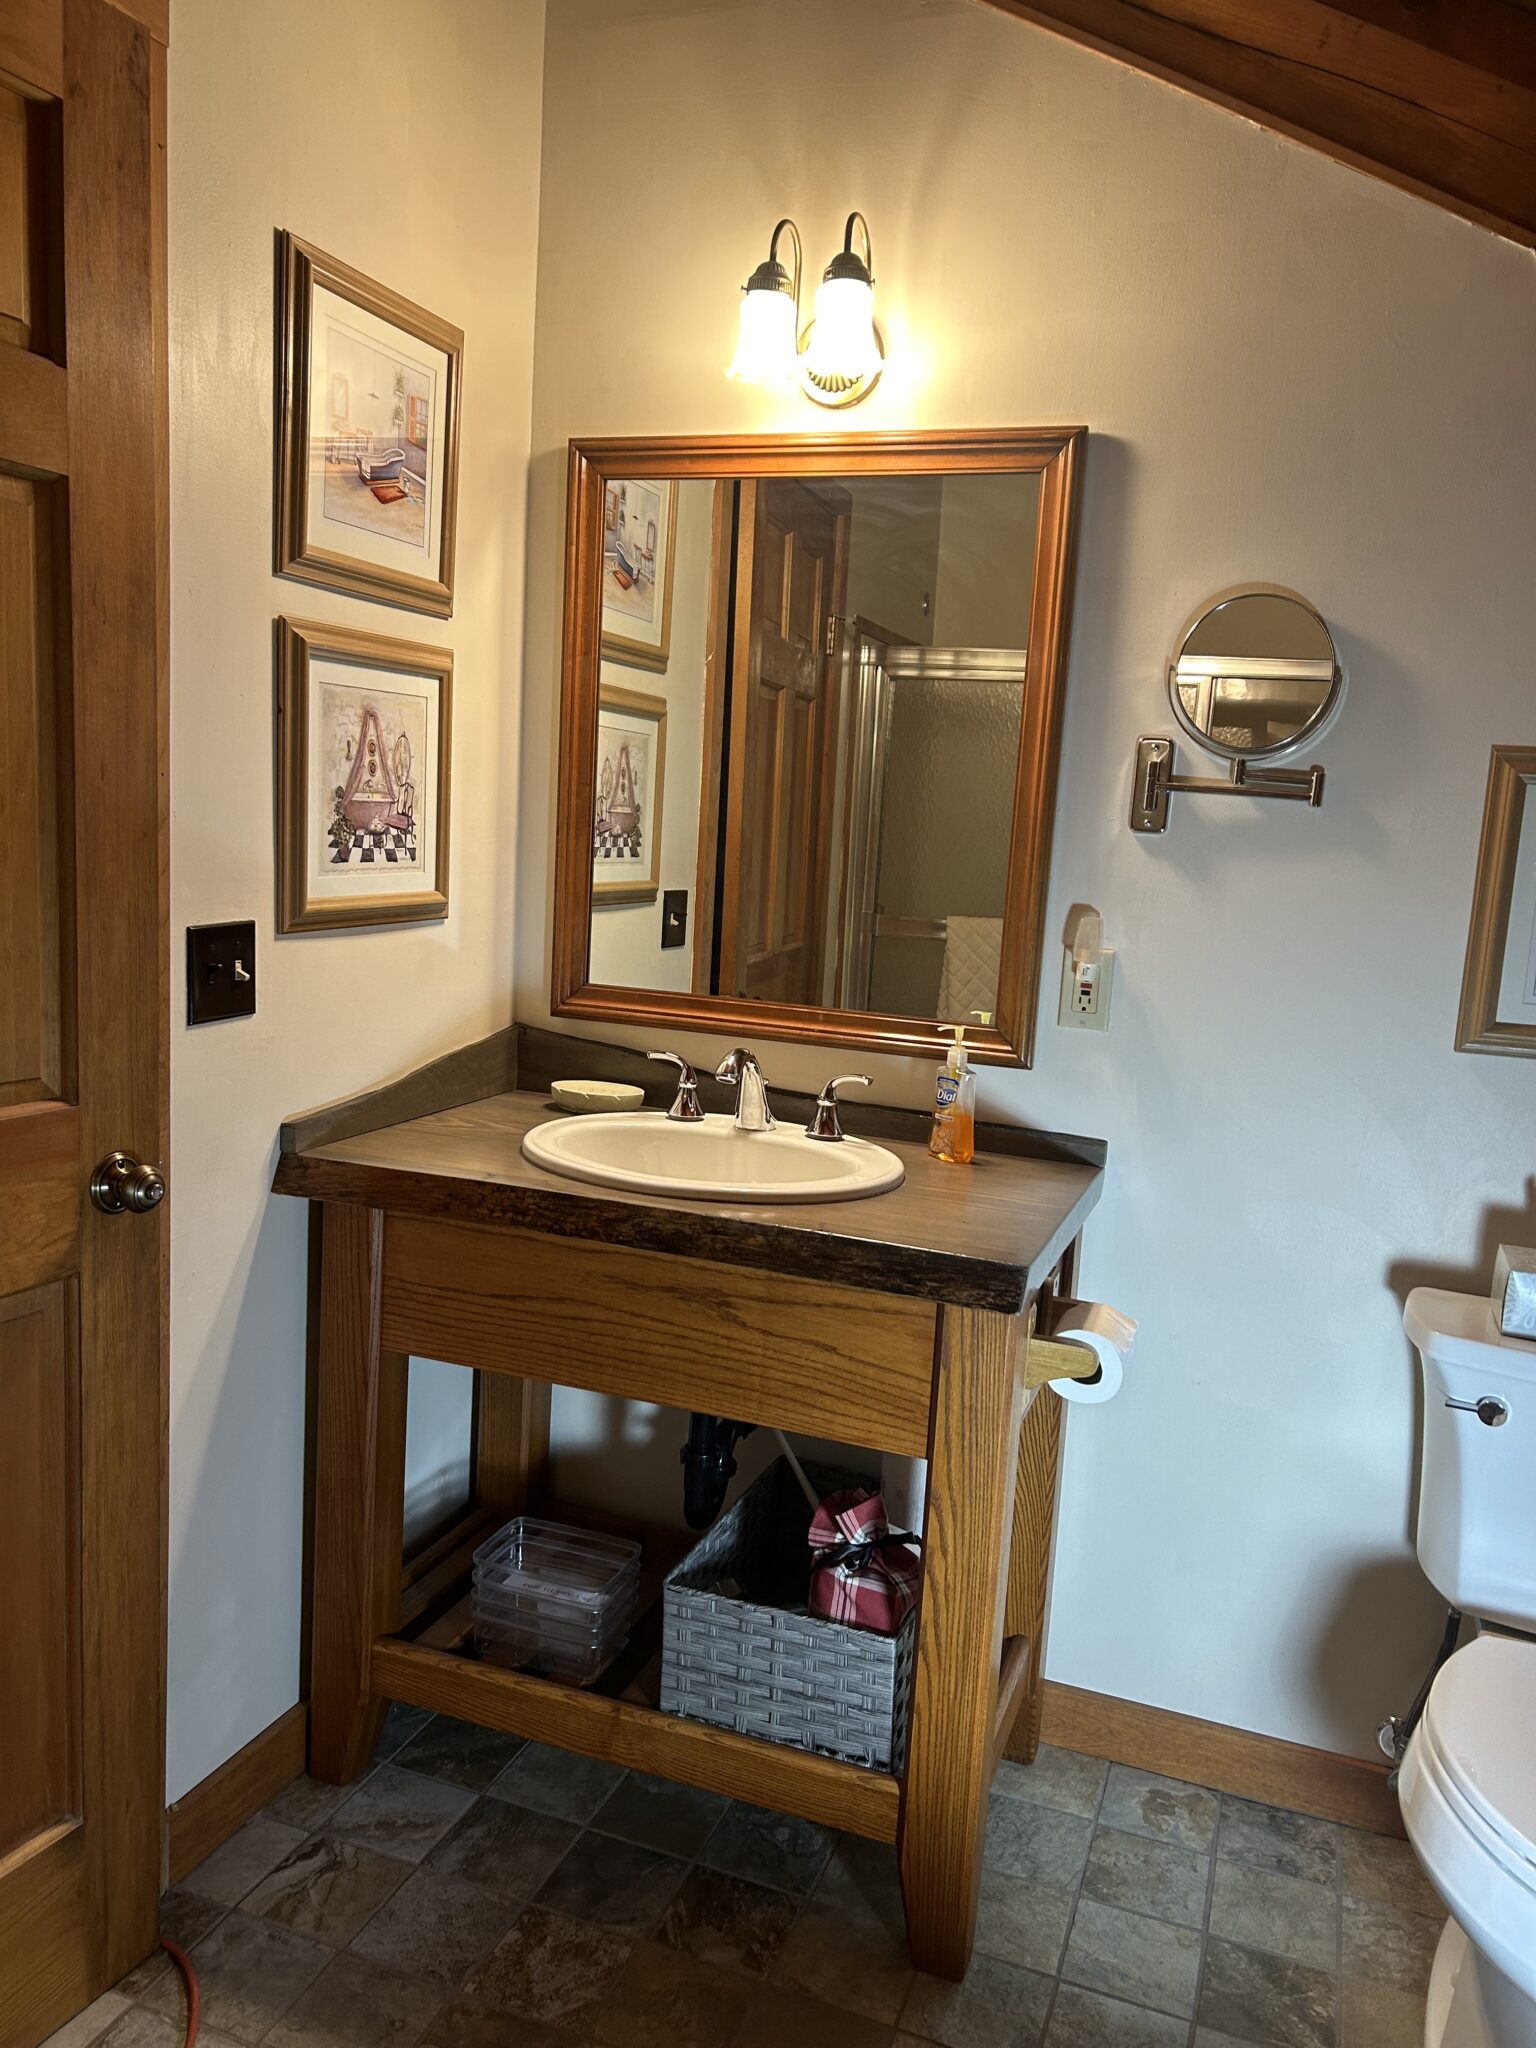 The newly renovated Shared bath has a new vanity with a solid wood counter, large mirror and a rustic porcelain floor.